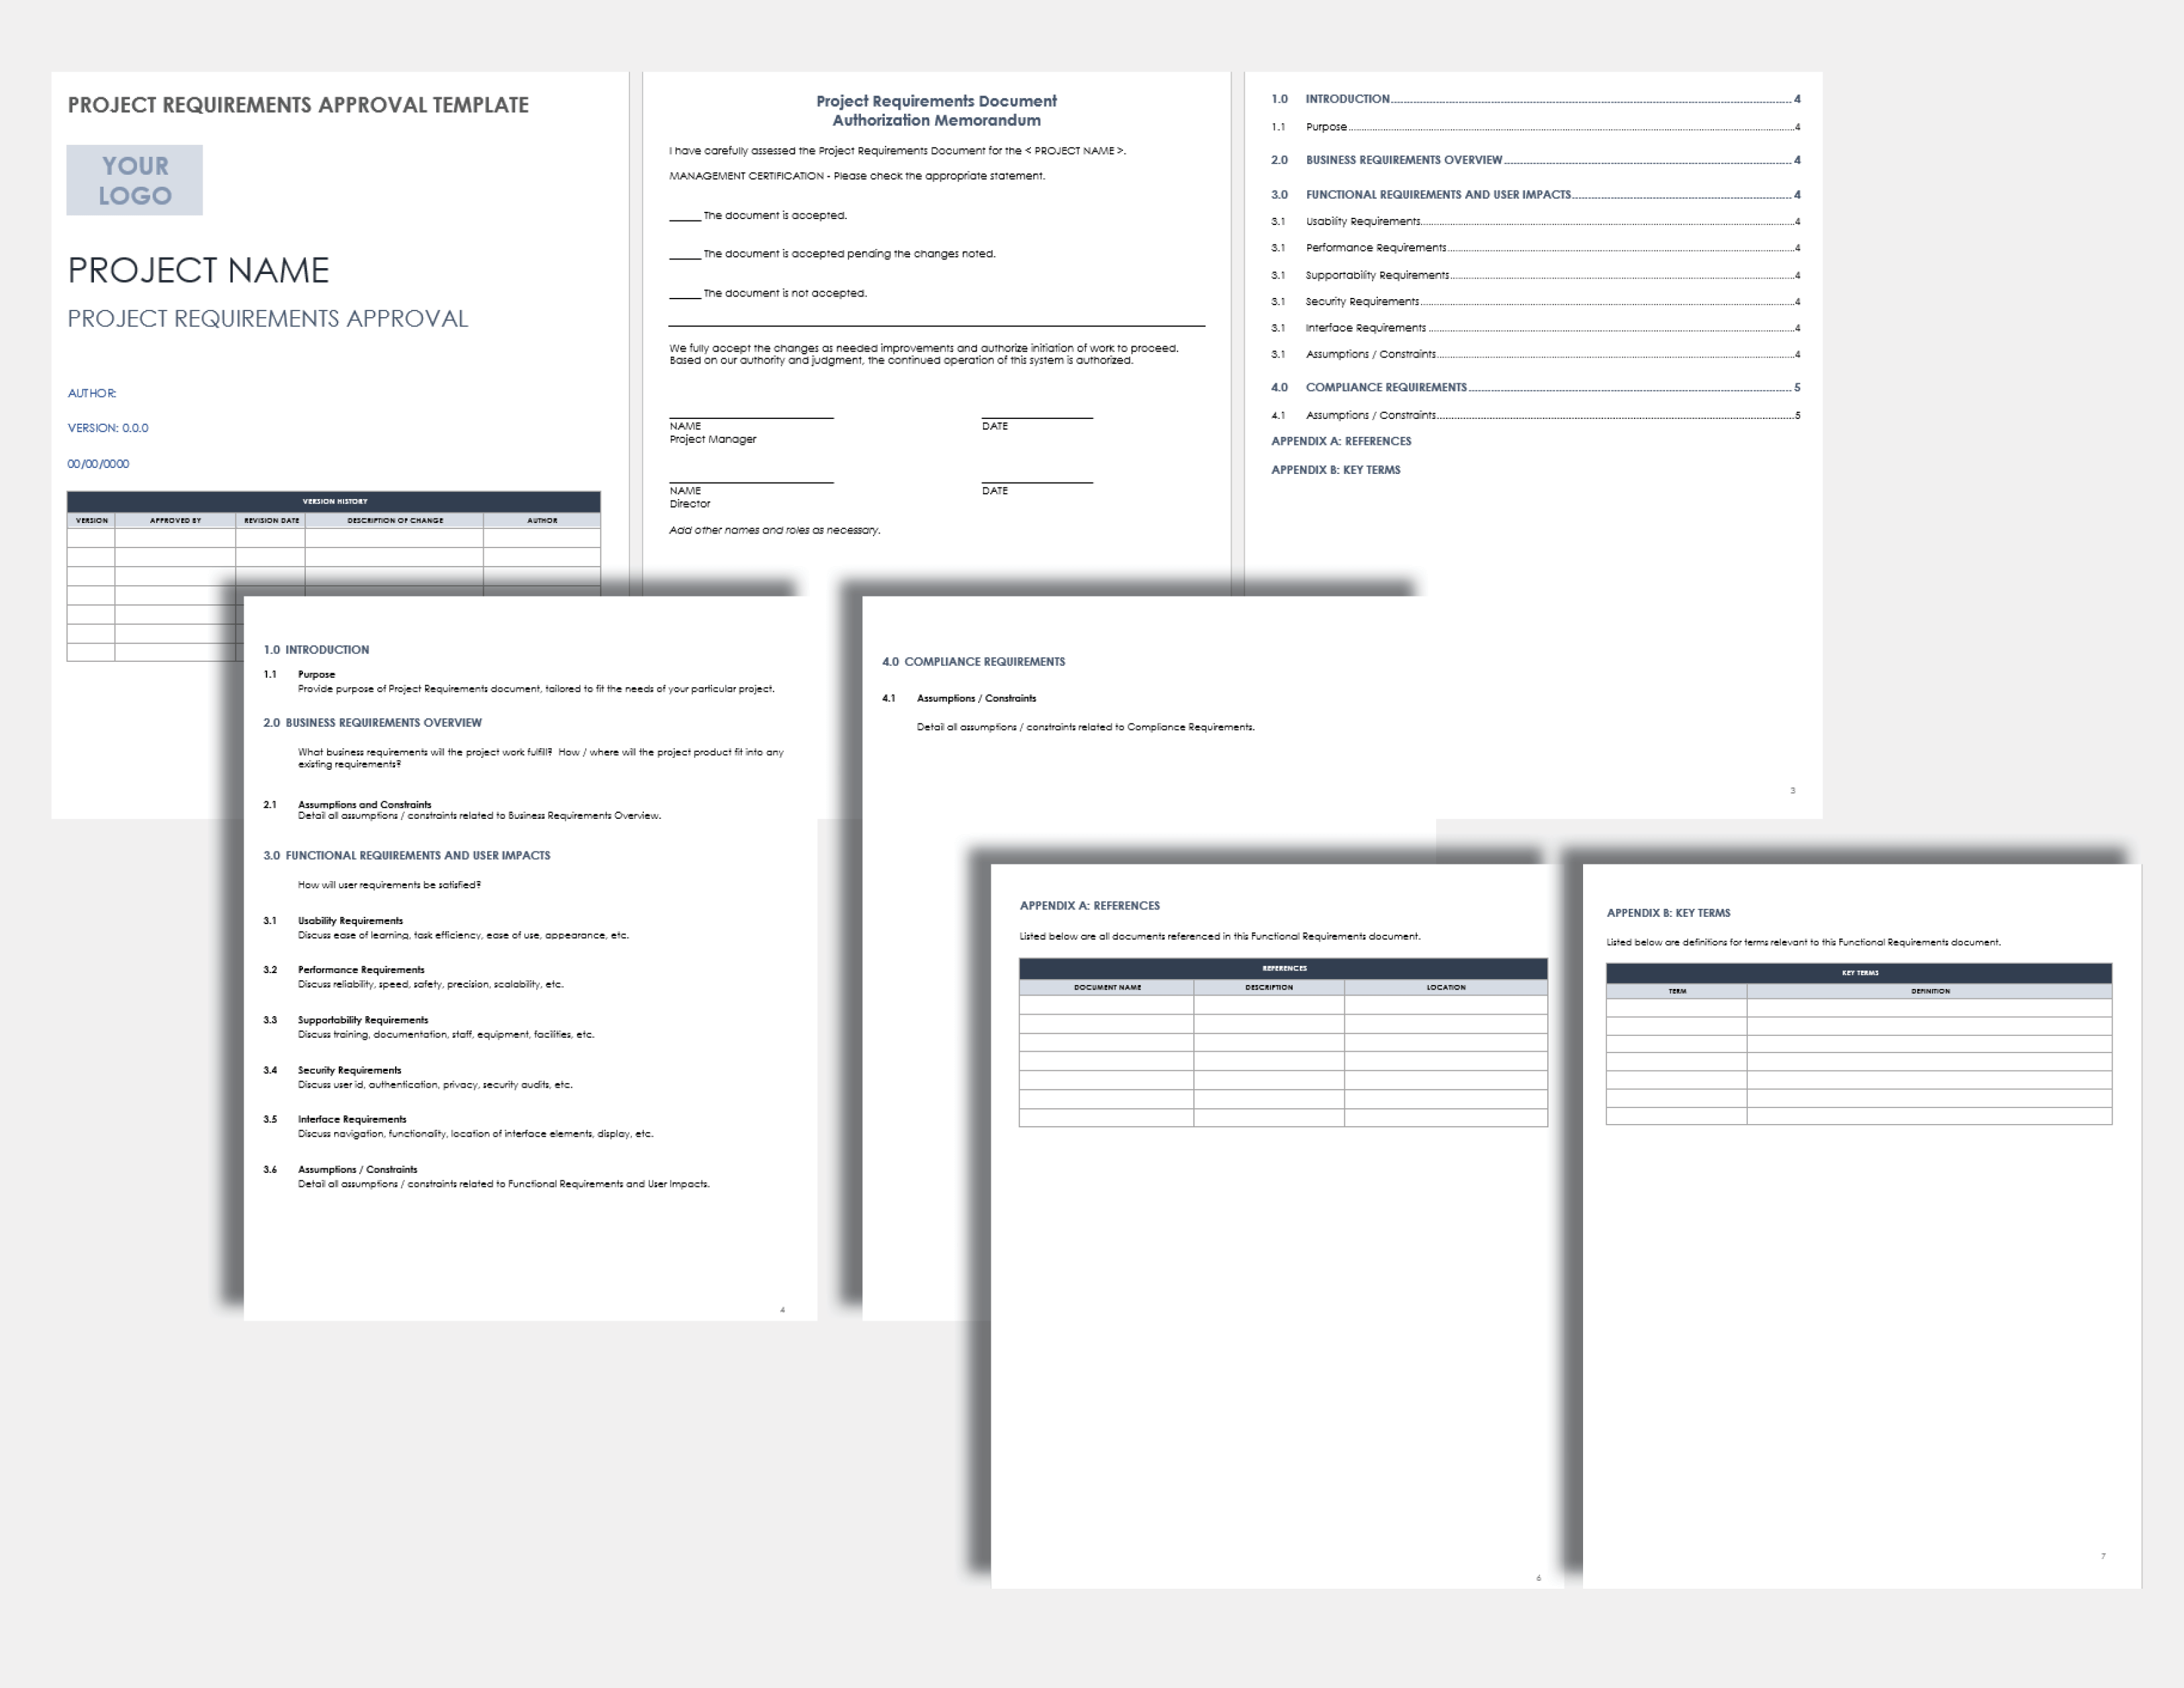 Project Requirements Approval Template